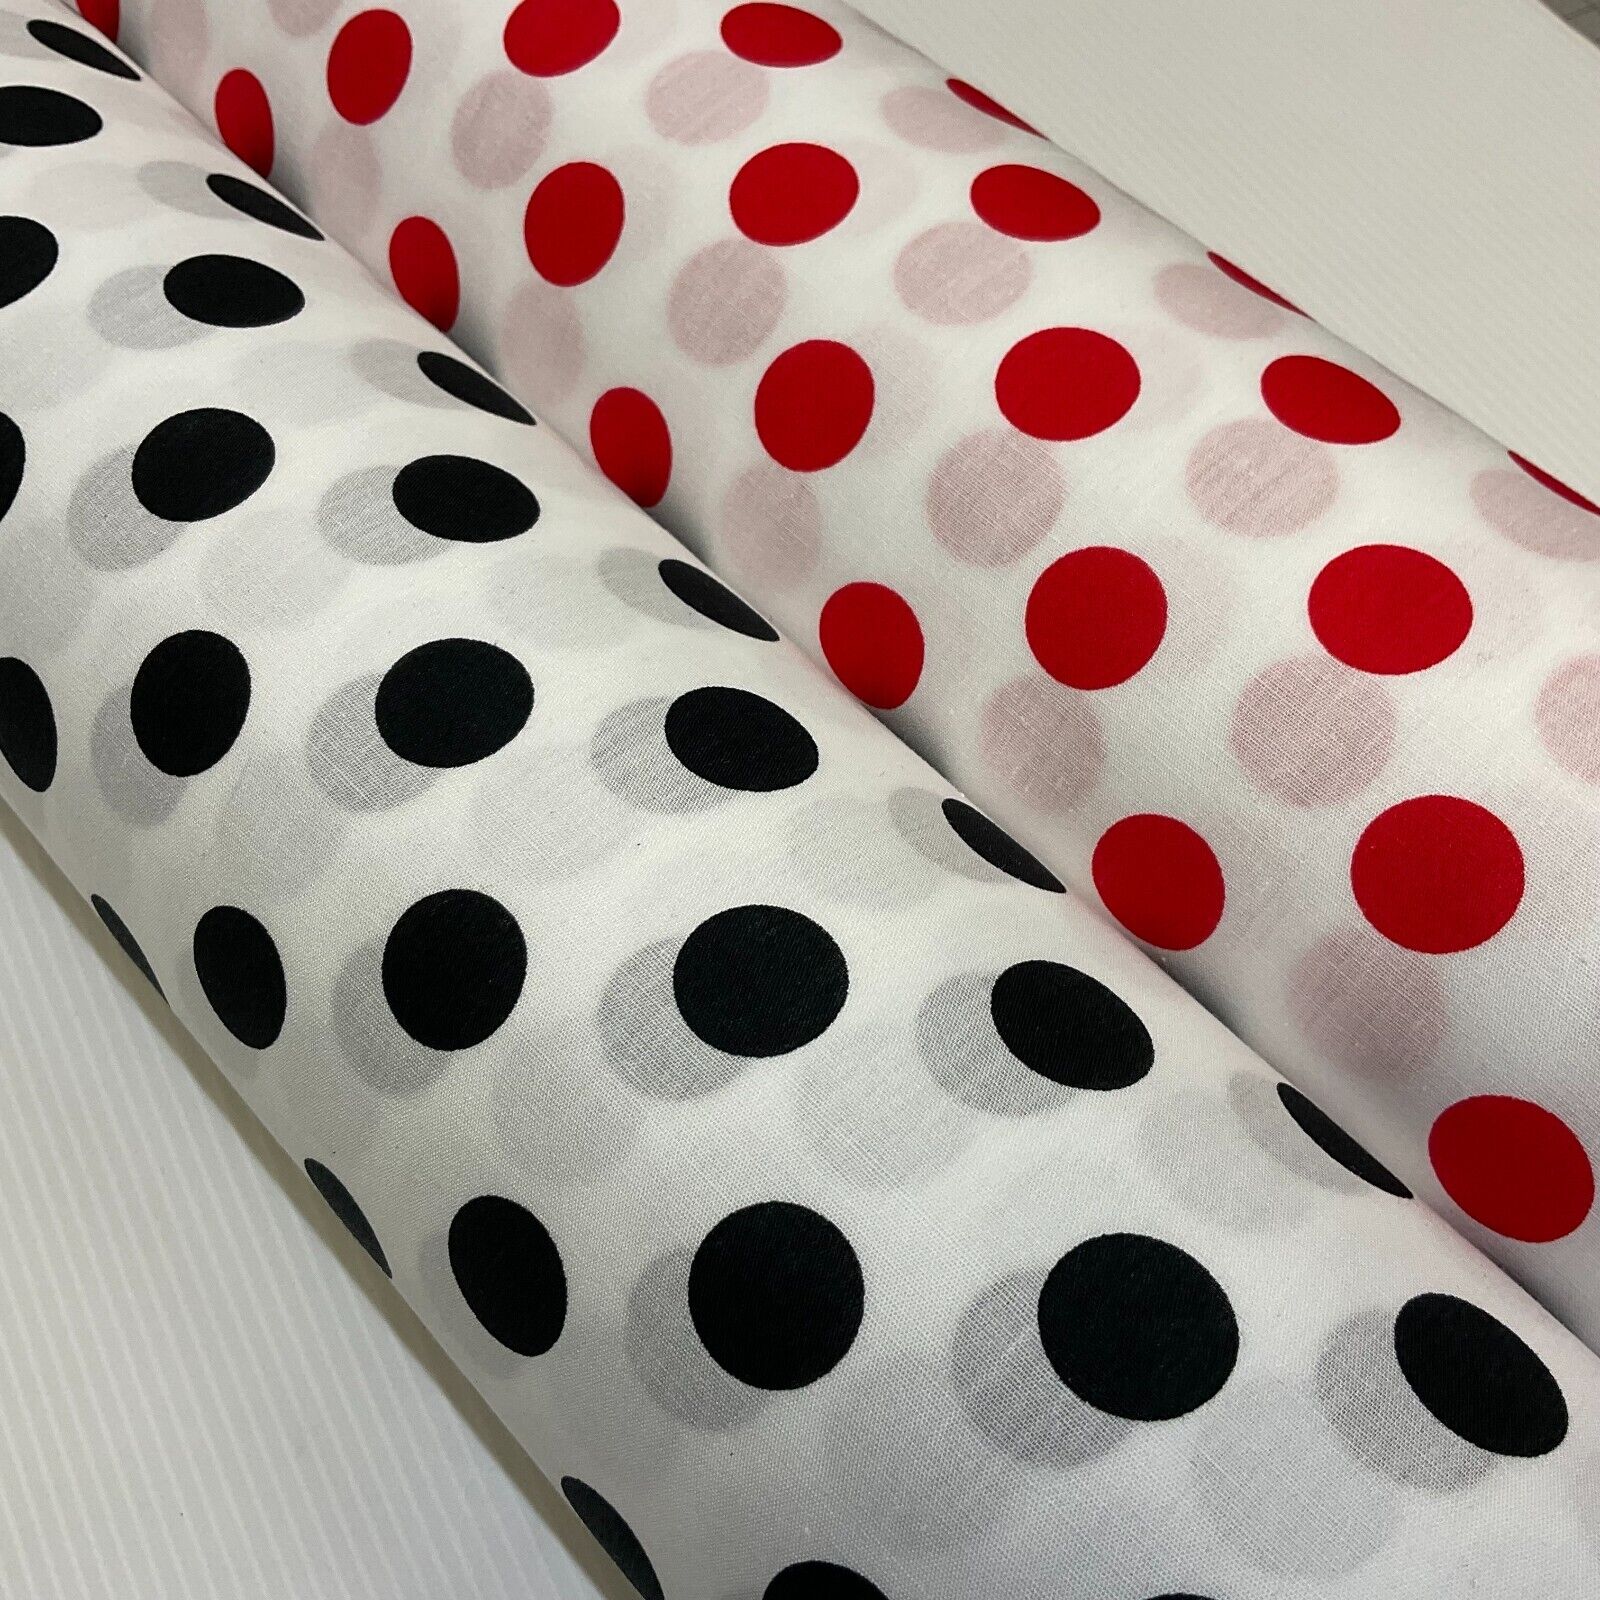 Soft Touch 100% Cotton Polka dot spot dotted printed dress fabric M1648